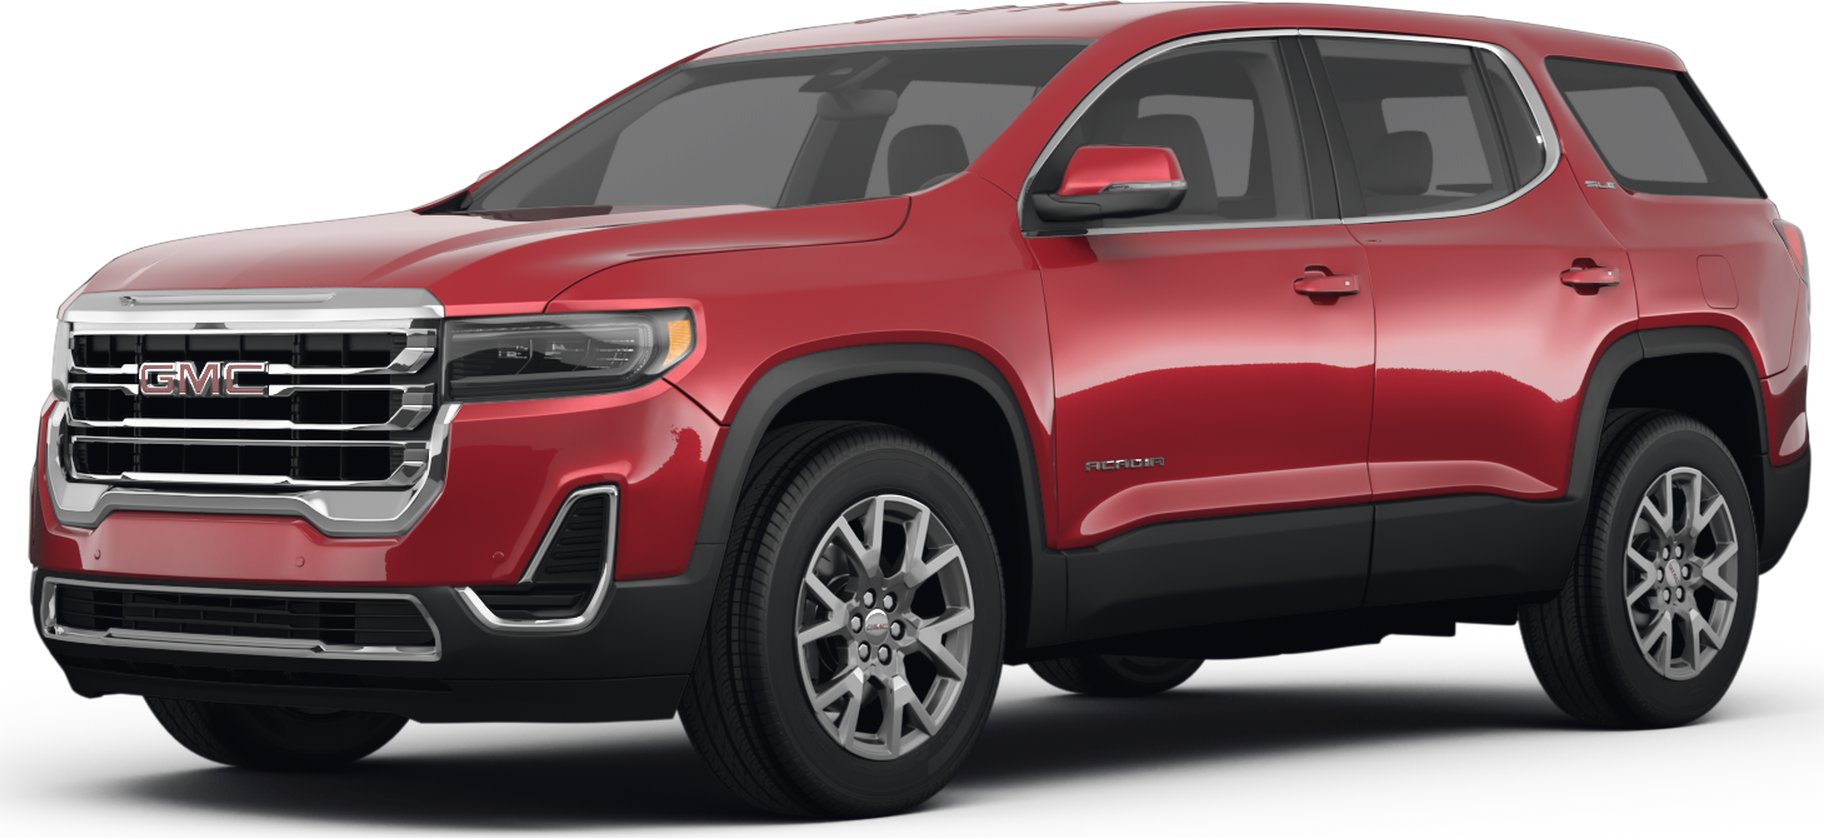 How comfortable is the 2022 GMC Acadia for long family trips?